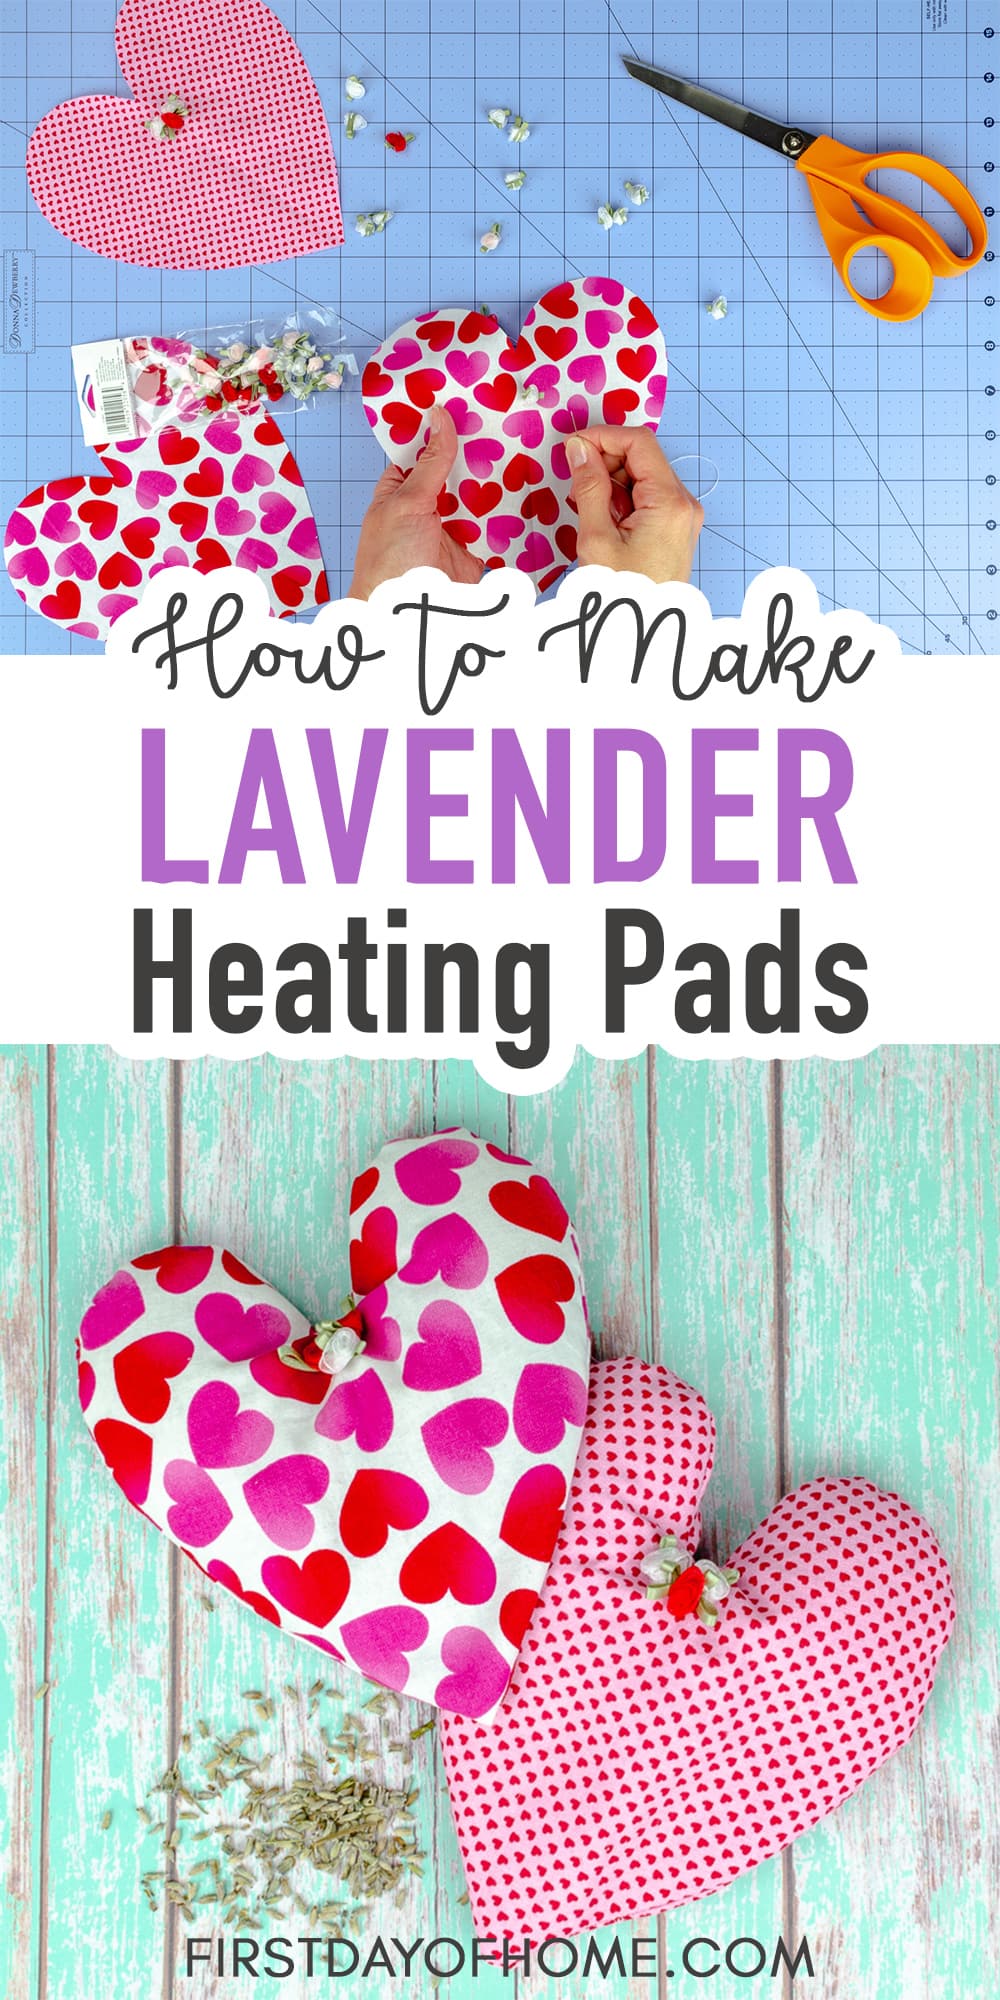 Heart shaped DIY heating pads made with heart pattern fabric with text overlay reading "How to Make Lavender Heating Pads"